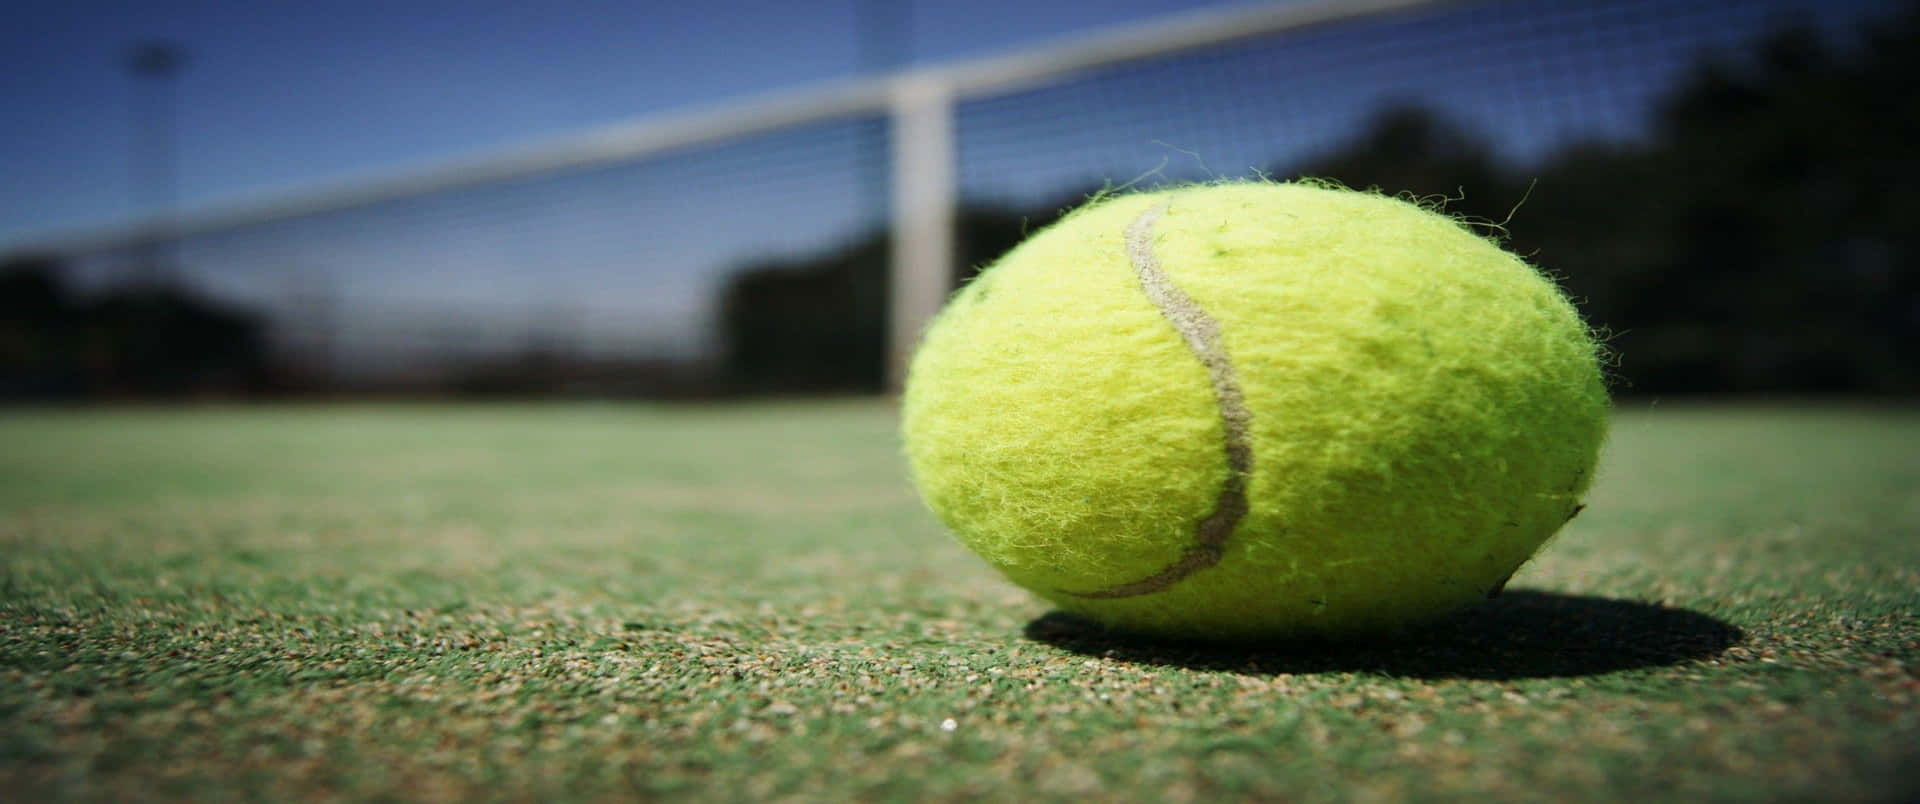 A Tennis Ball On The Ground